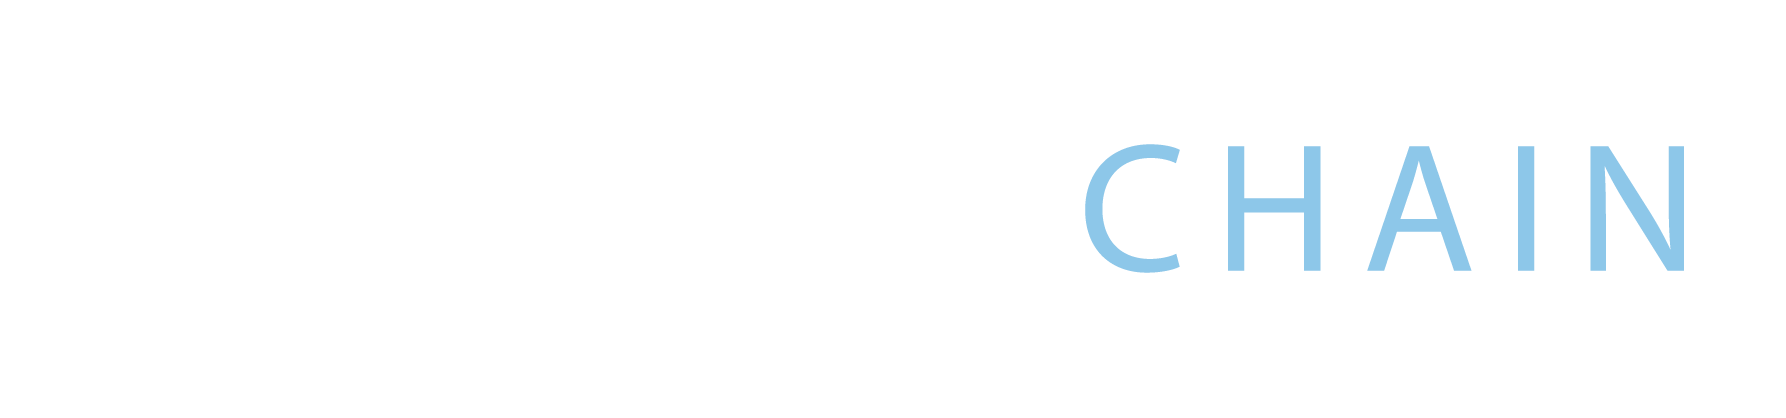 EverChain - Monitor Recover Sell Compliantly